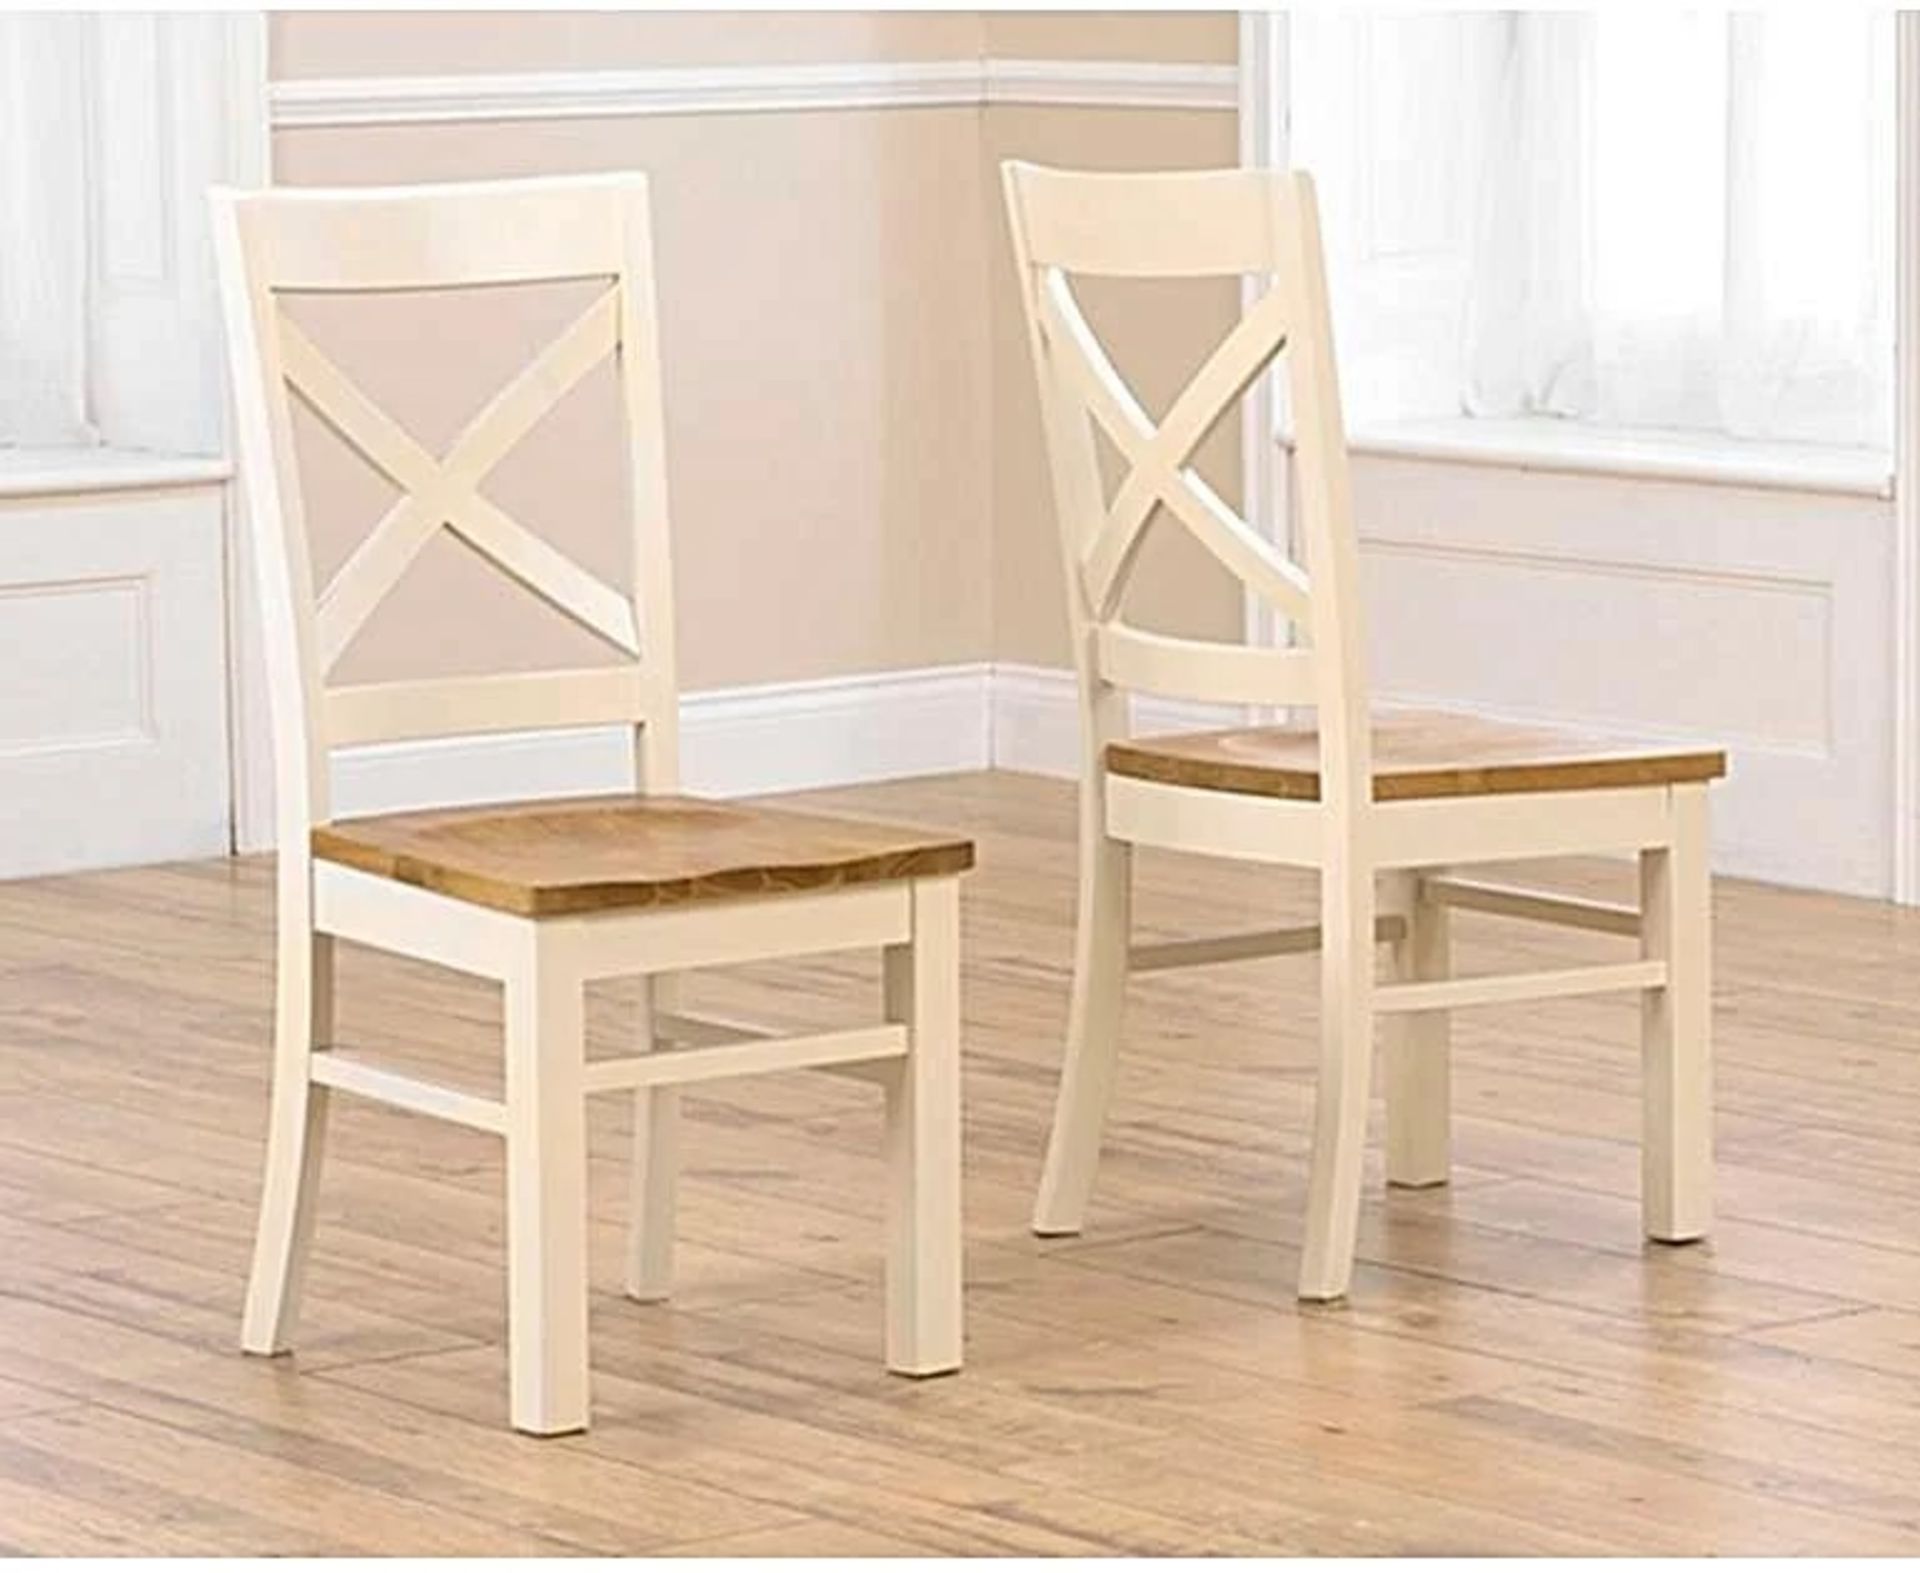 A set of 5 x Cavendish Solid Oak and Cream Dining Chairs with a traditional rustic style and charm